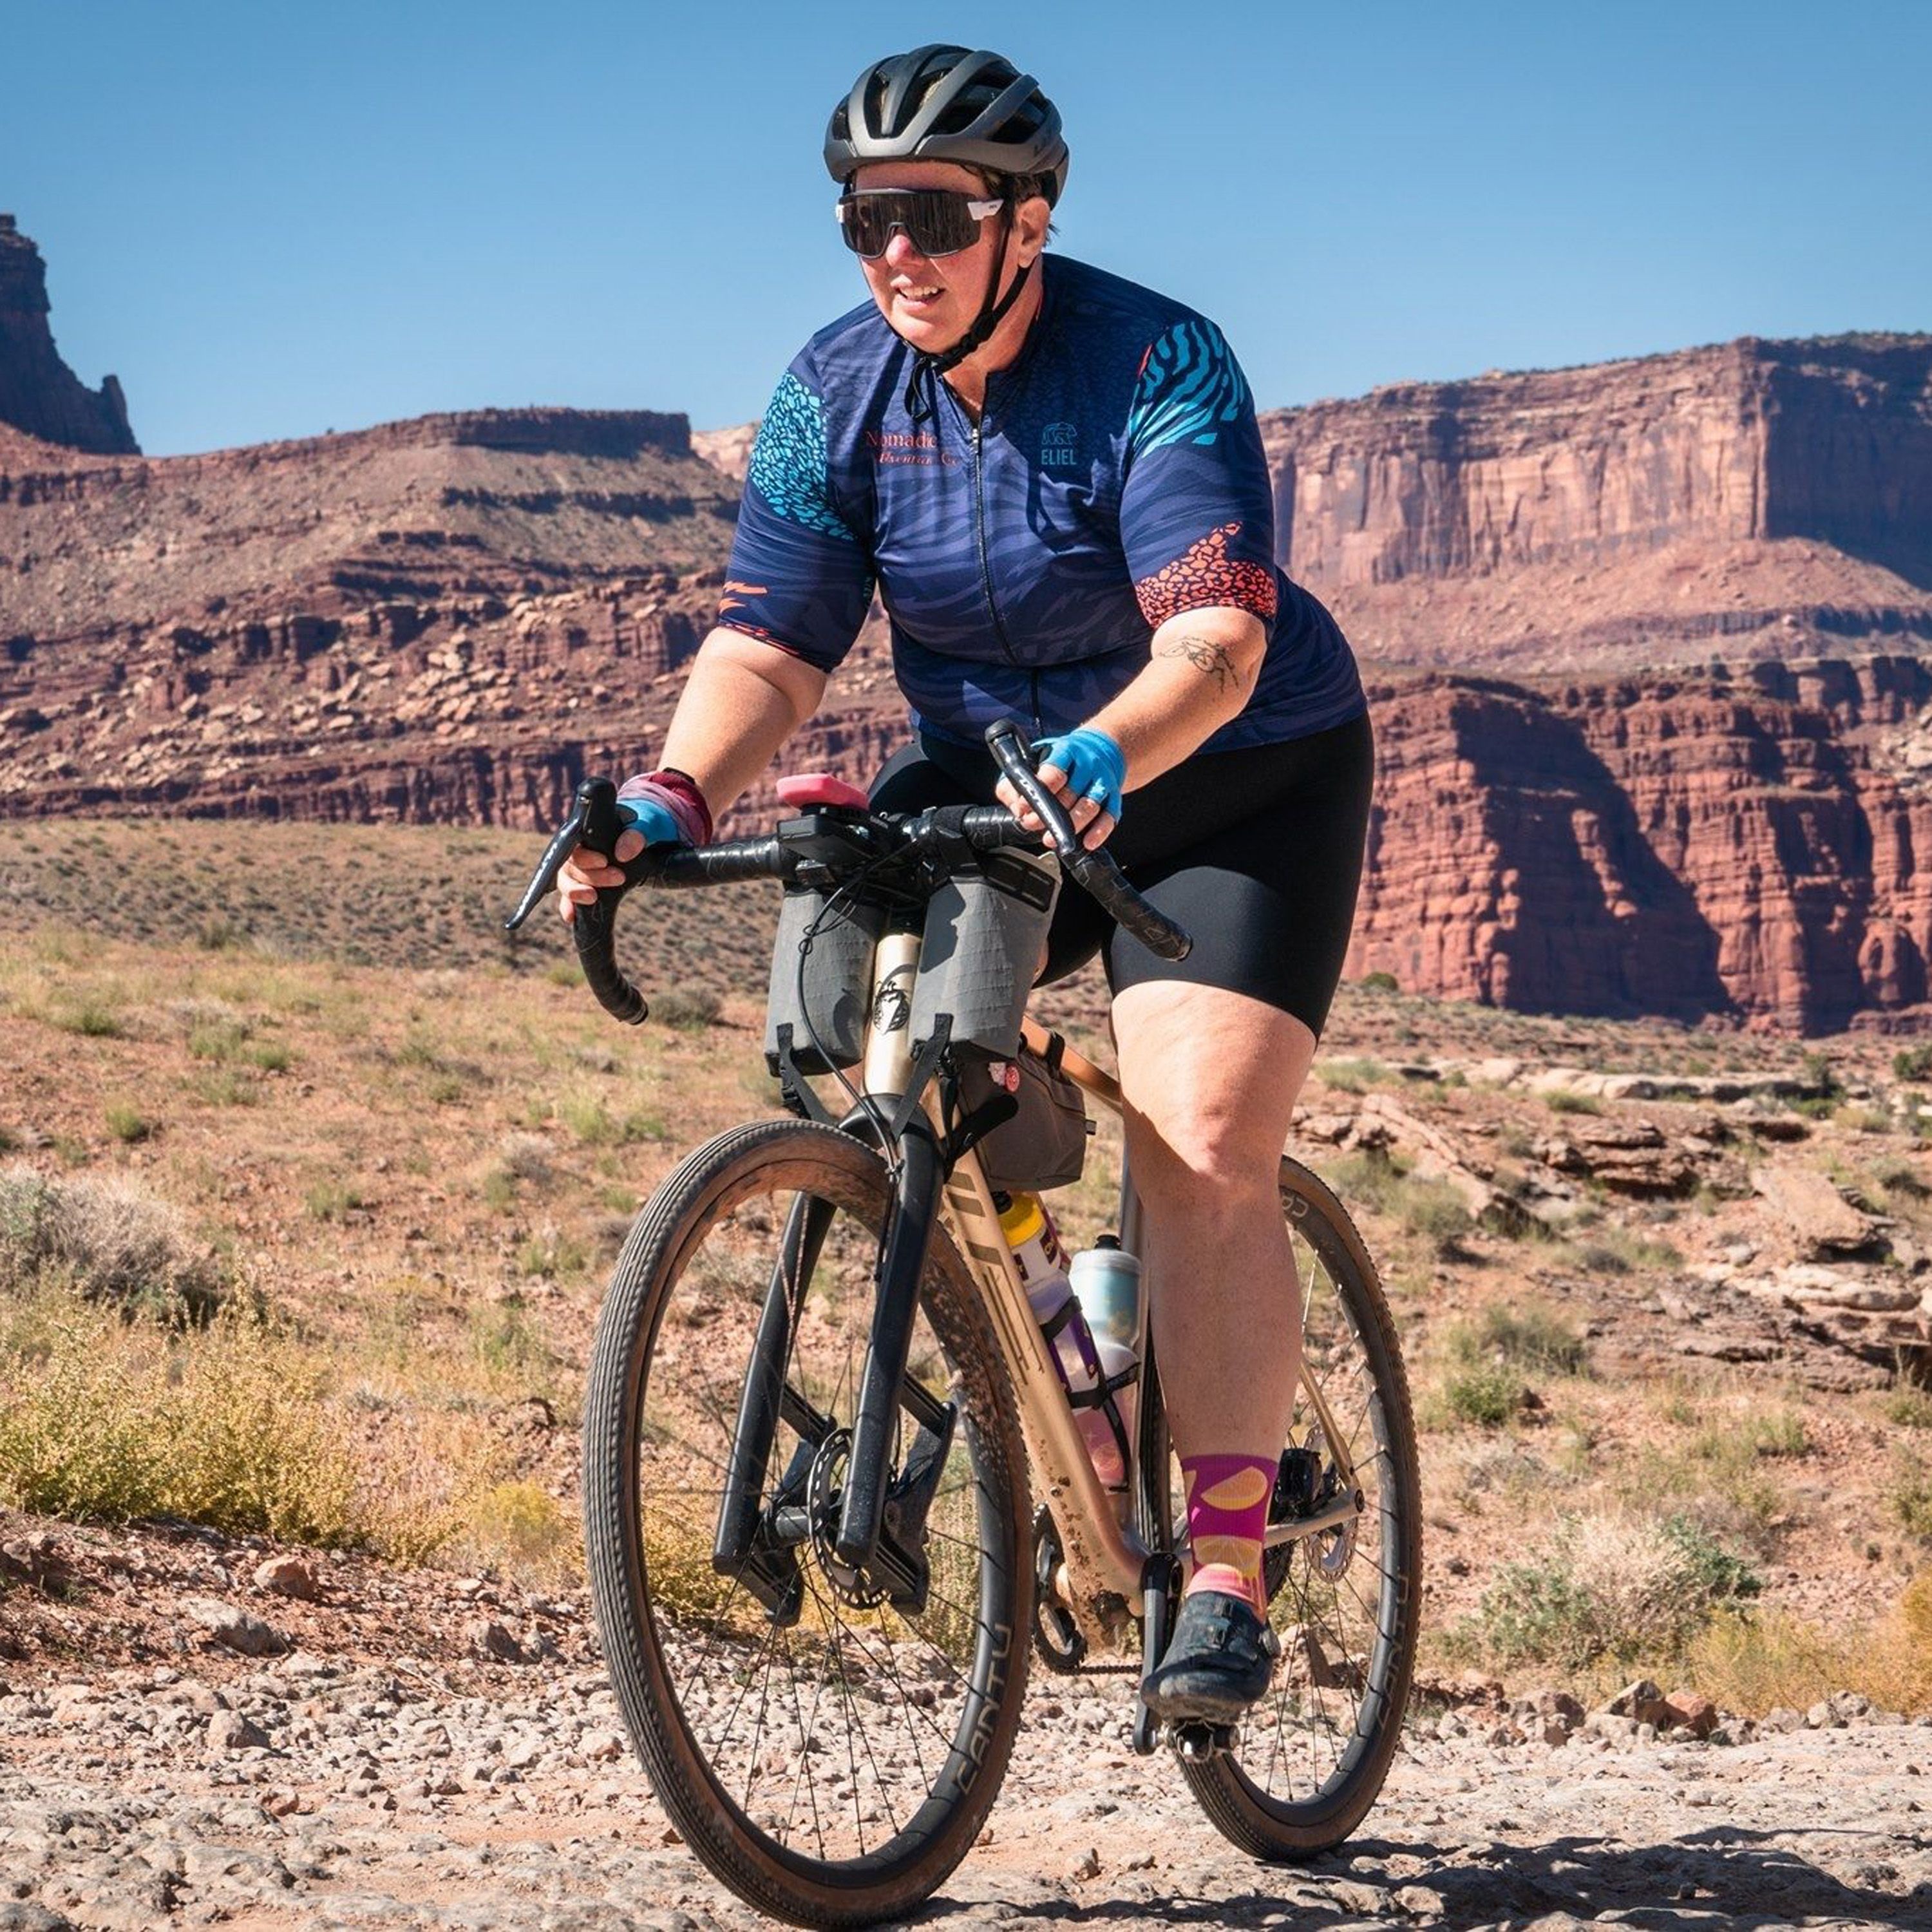 This Gravel Cyclist Is on a Mission to Get Women into Bikepacking